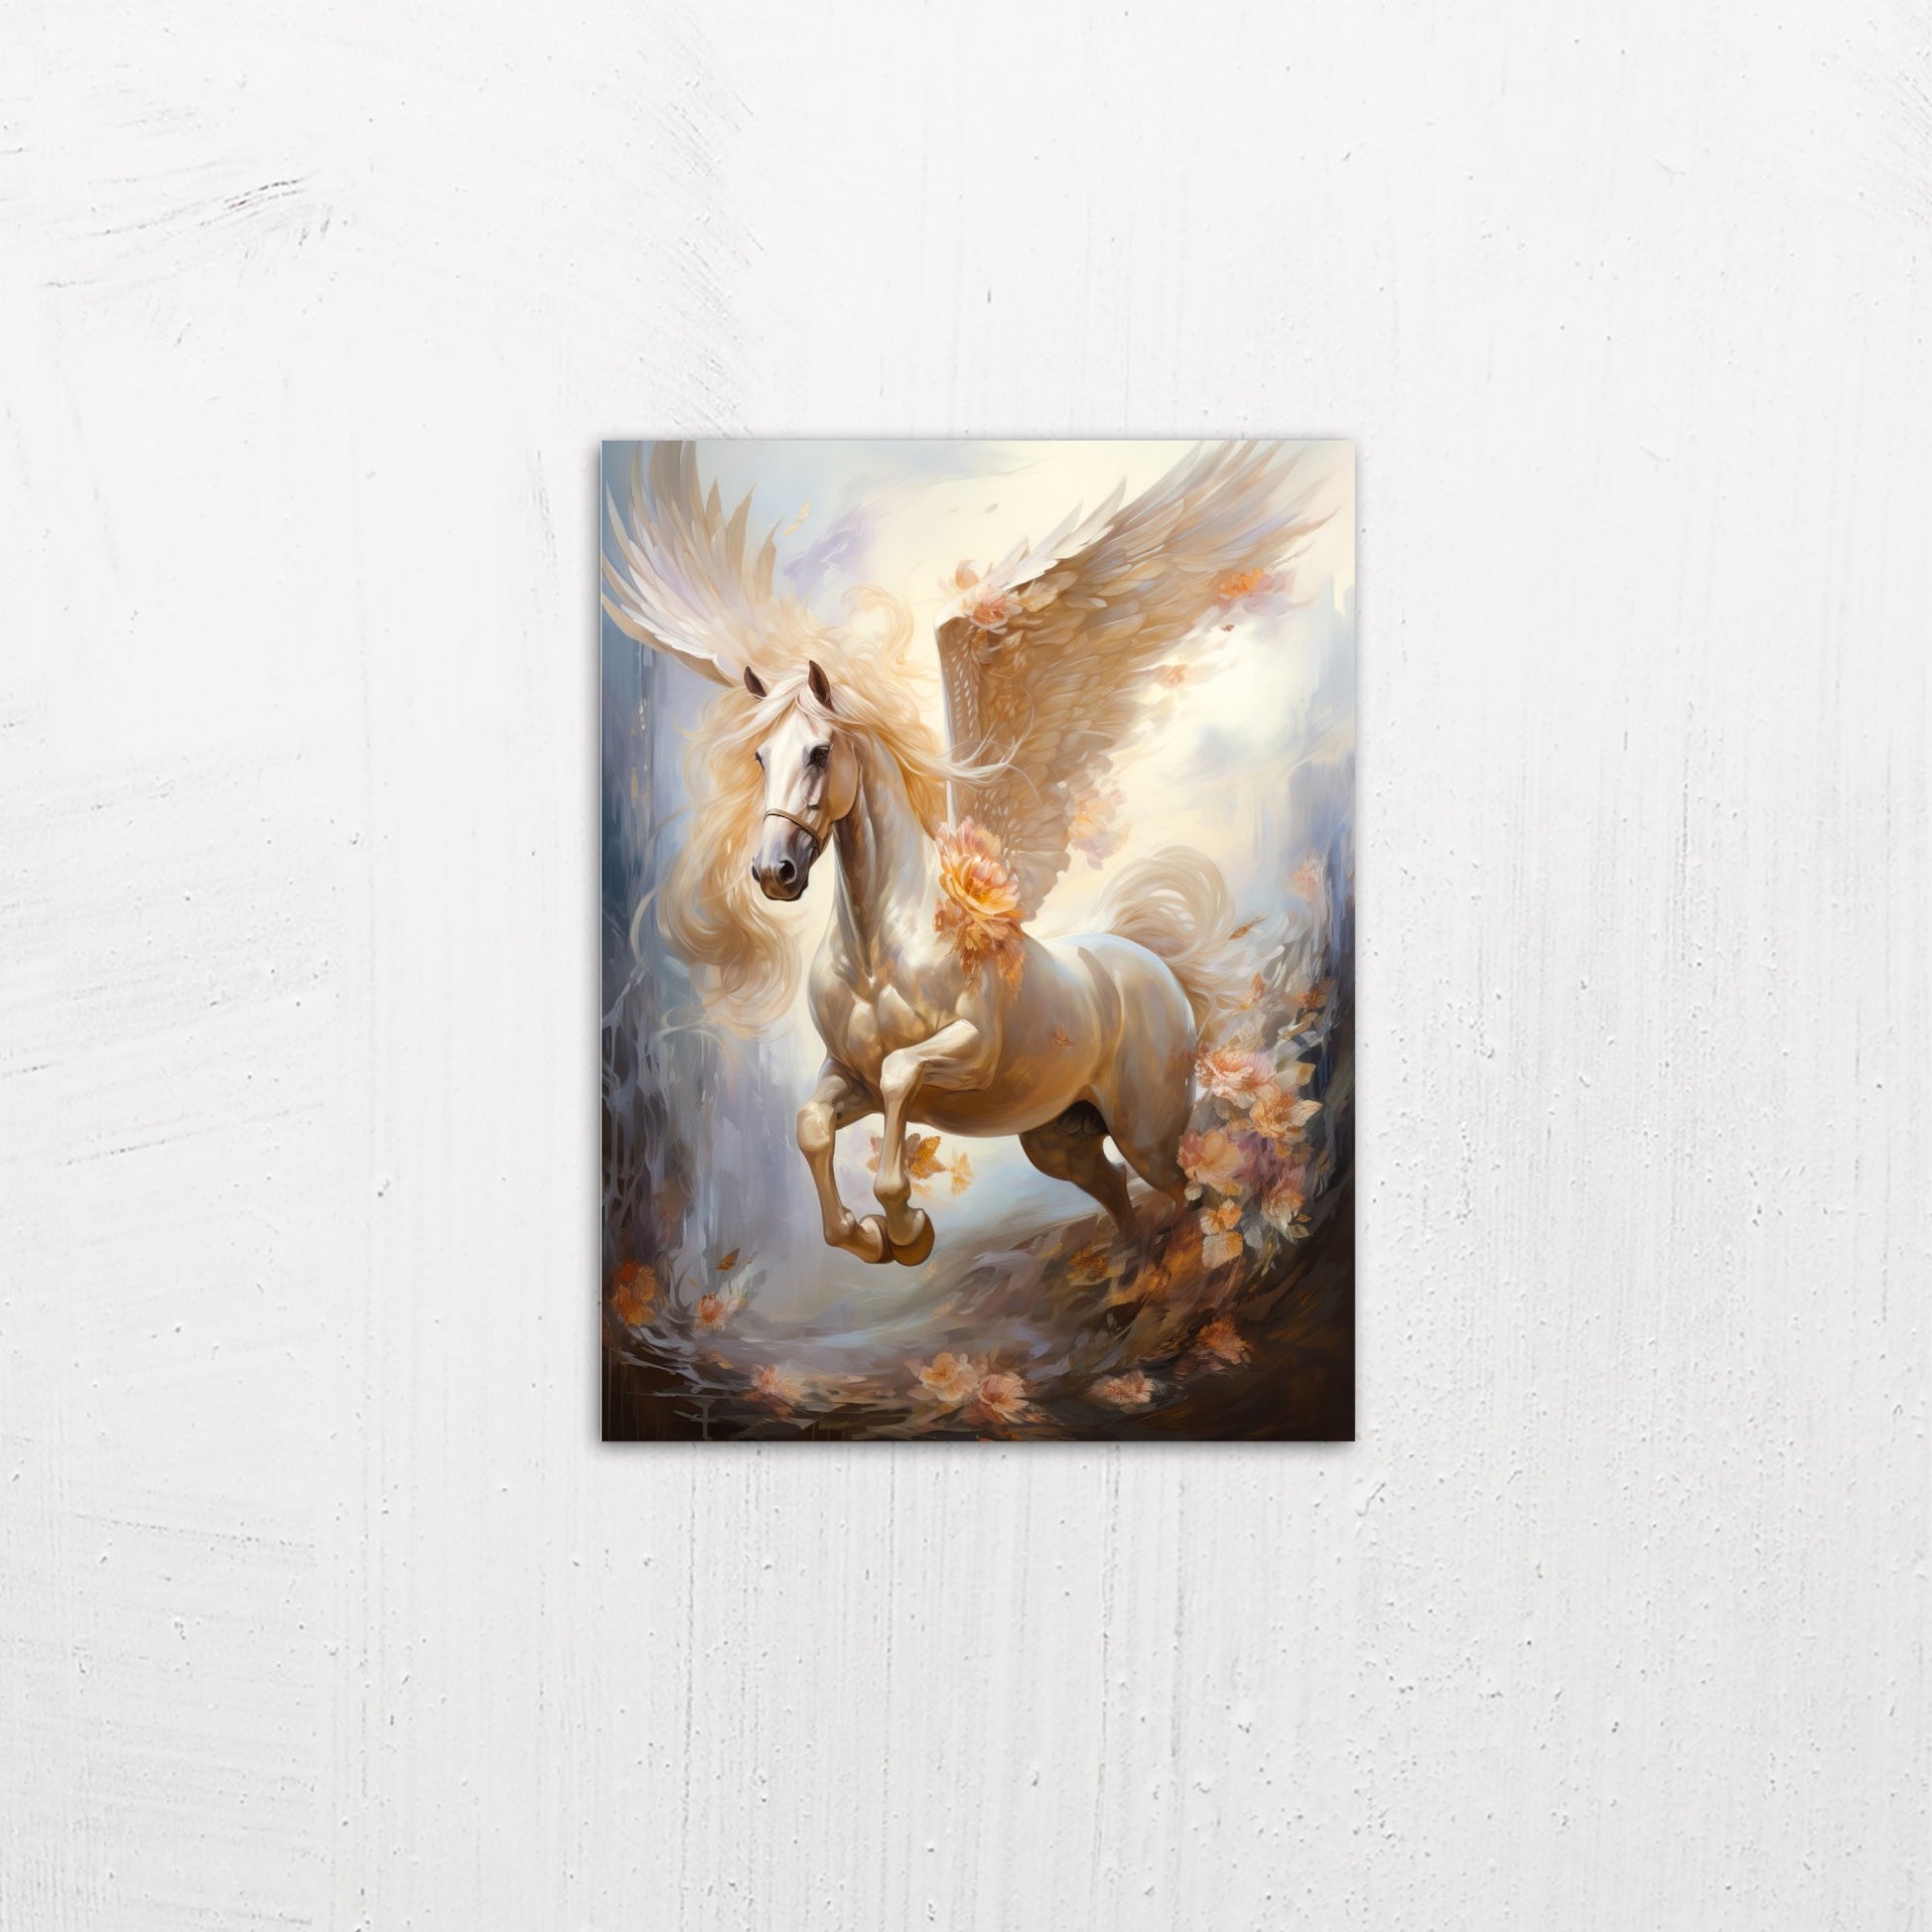 A small size metal art poster display plate with printed design of a Pegasus Flying Horse Fantasy Painting